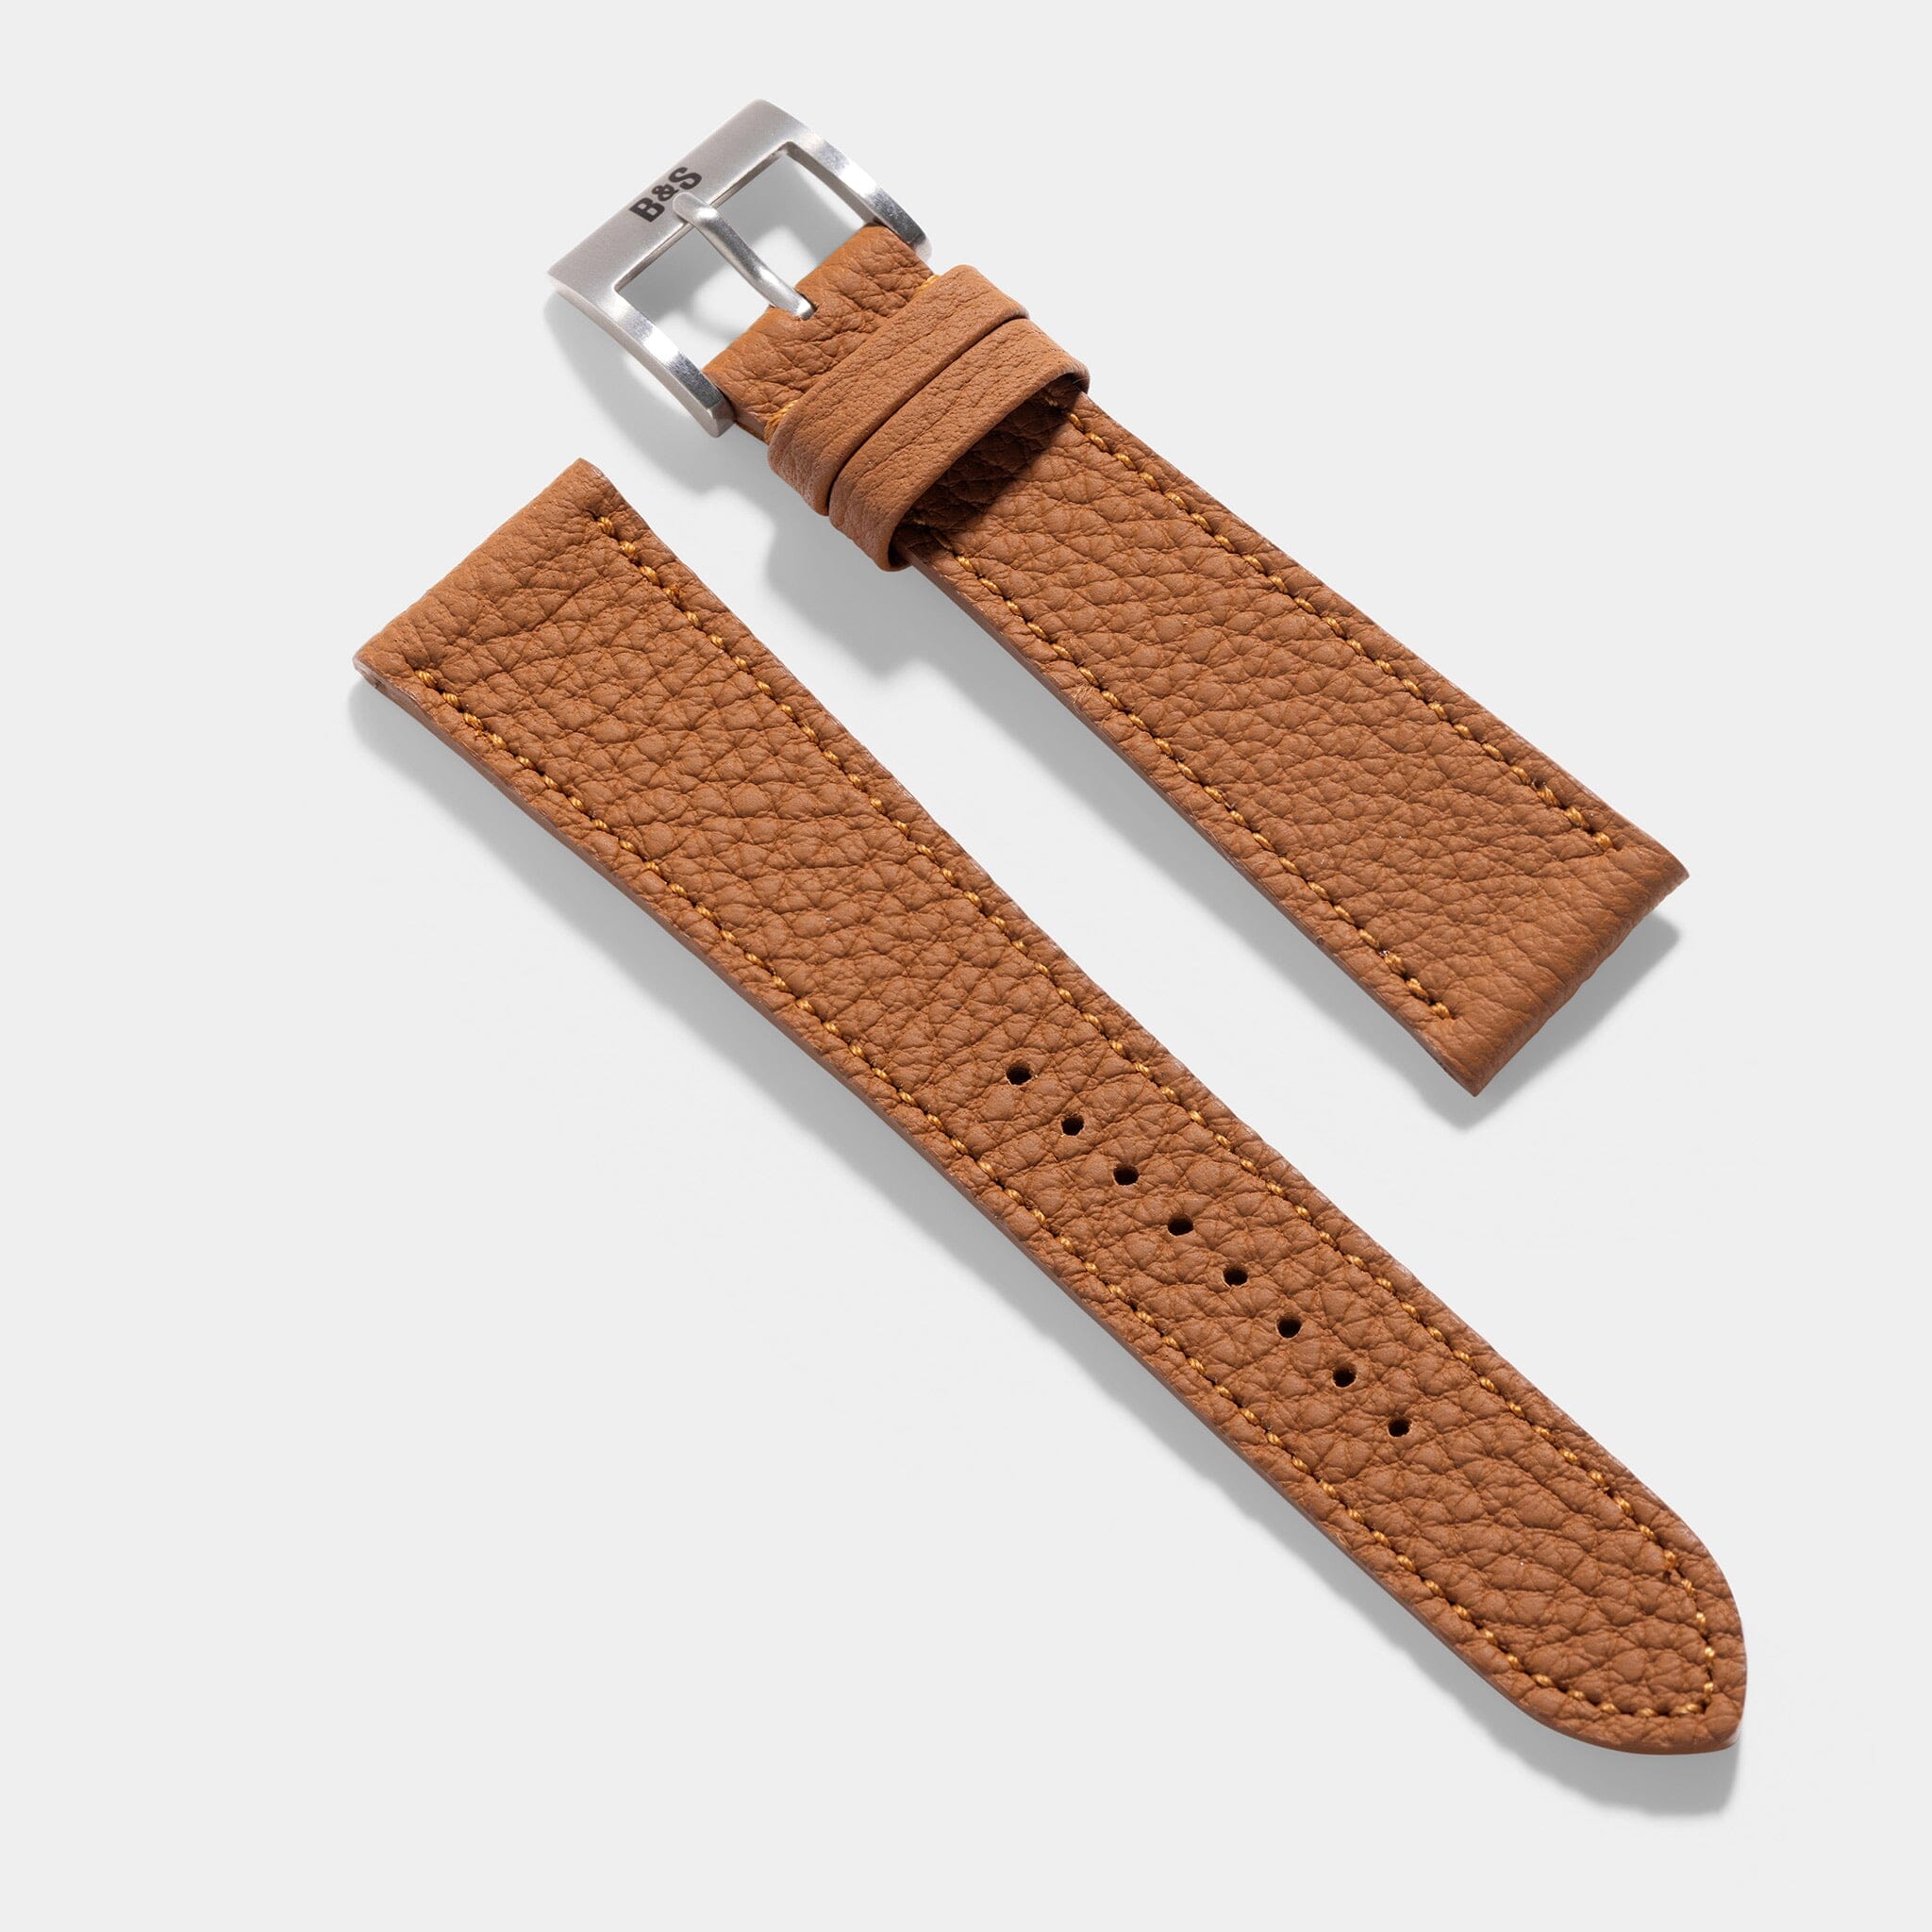 Buy Black Togo Leather Watch Strap, Full Grain Leather Watch Strap.  Handmade Calf Watch Band. Genuine Leather Band. Replacement Watch Bands  Online in India - Etsy